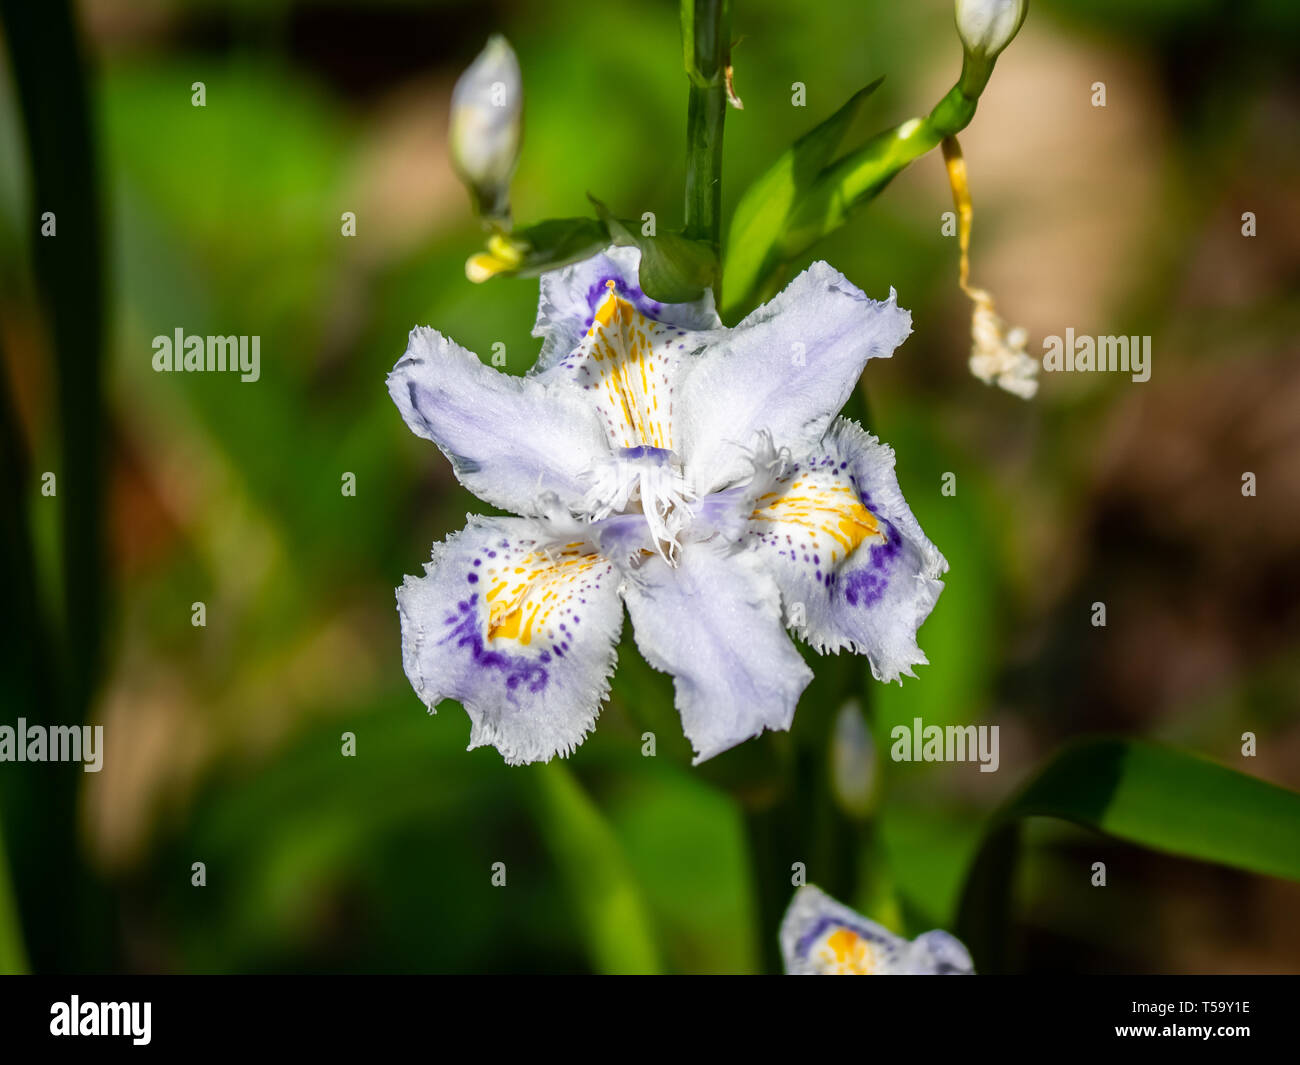 A fringed iris, iris japonica, blooms along a hiking path in a forest nature preserve in central Kanagawa, Japan. Stock Photo